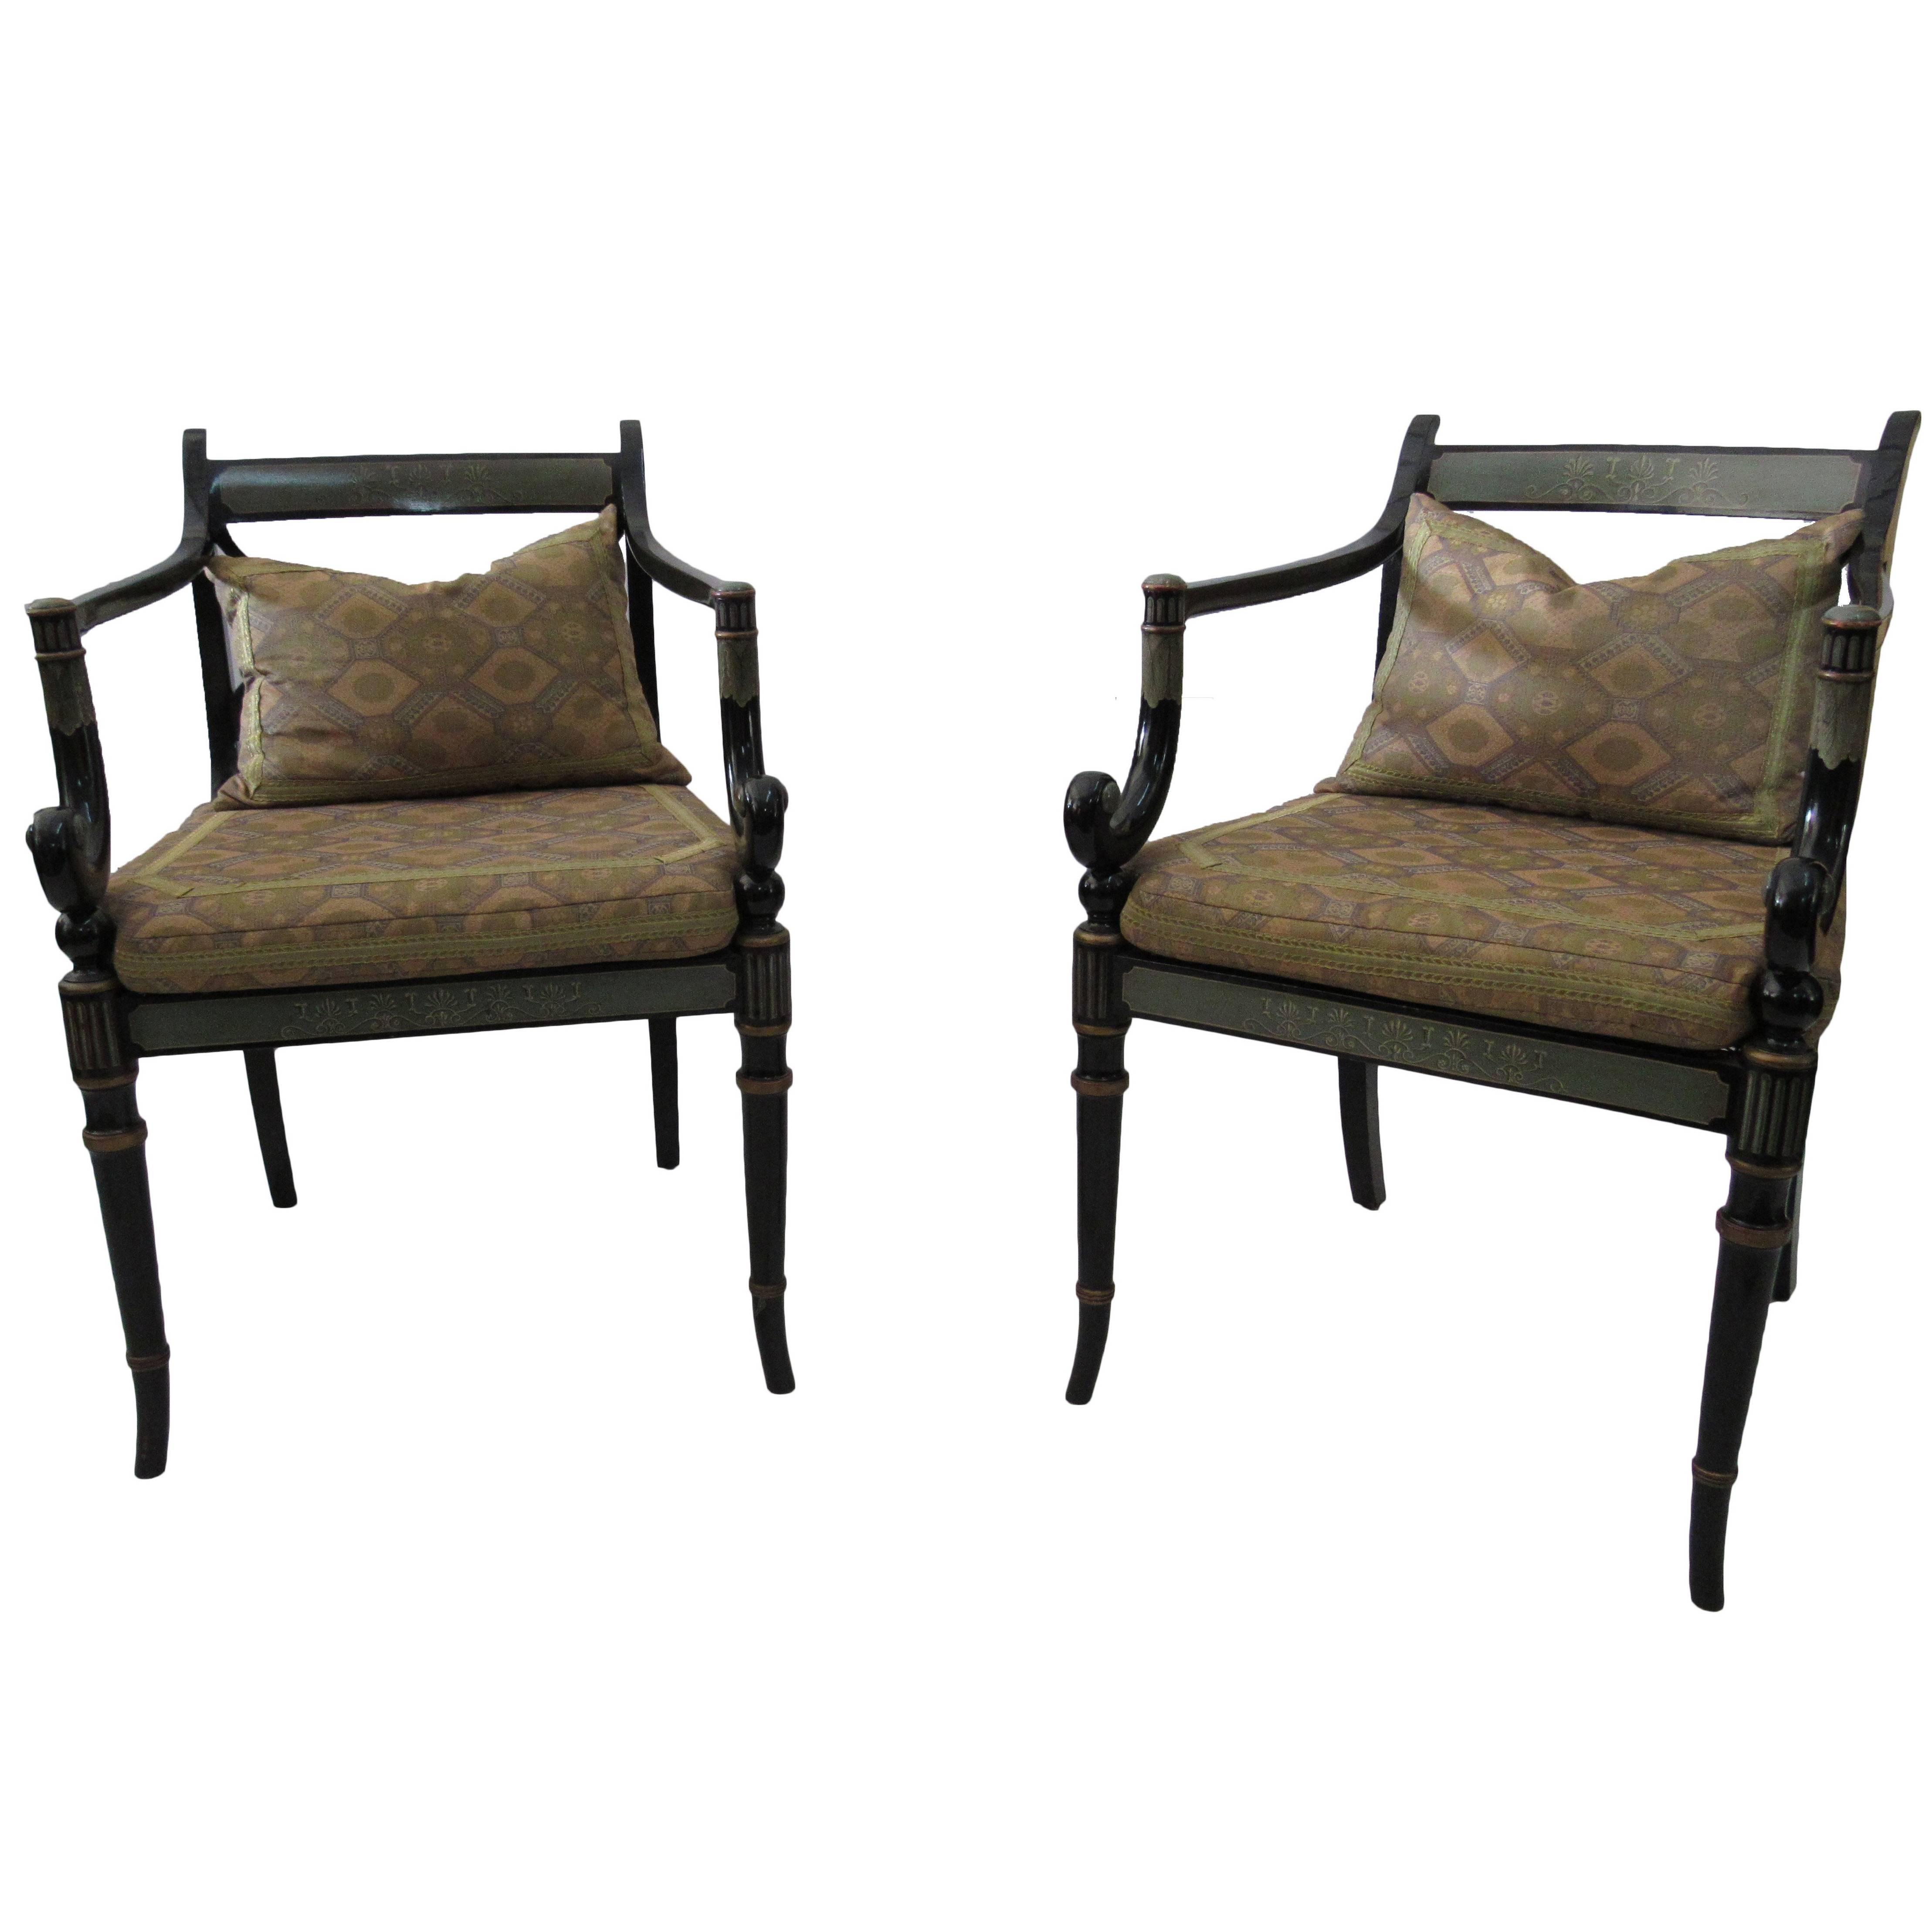 English Regency style black lacquer set of six armchairs with cane seats. The set came to us from a dismantled project by the world renowned designer and architect Peter Marino.
The elegant curved and shaped armchairs feature a shaped crest rail